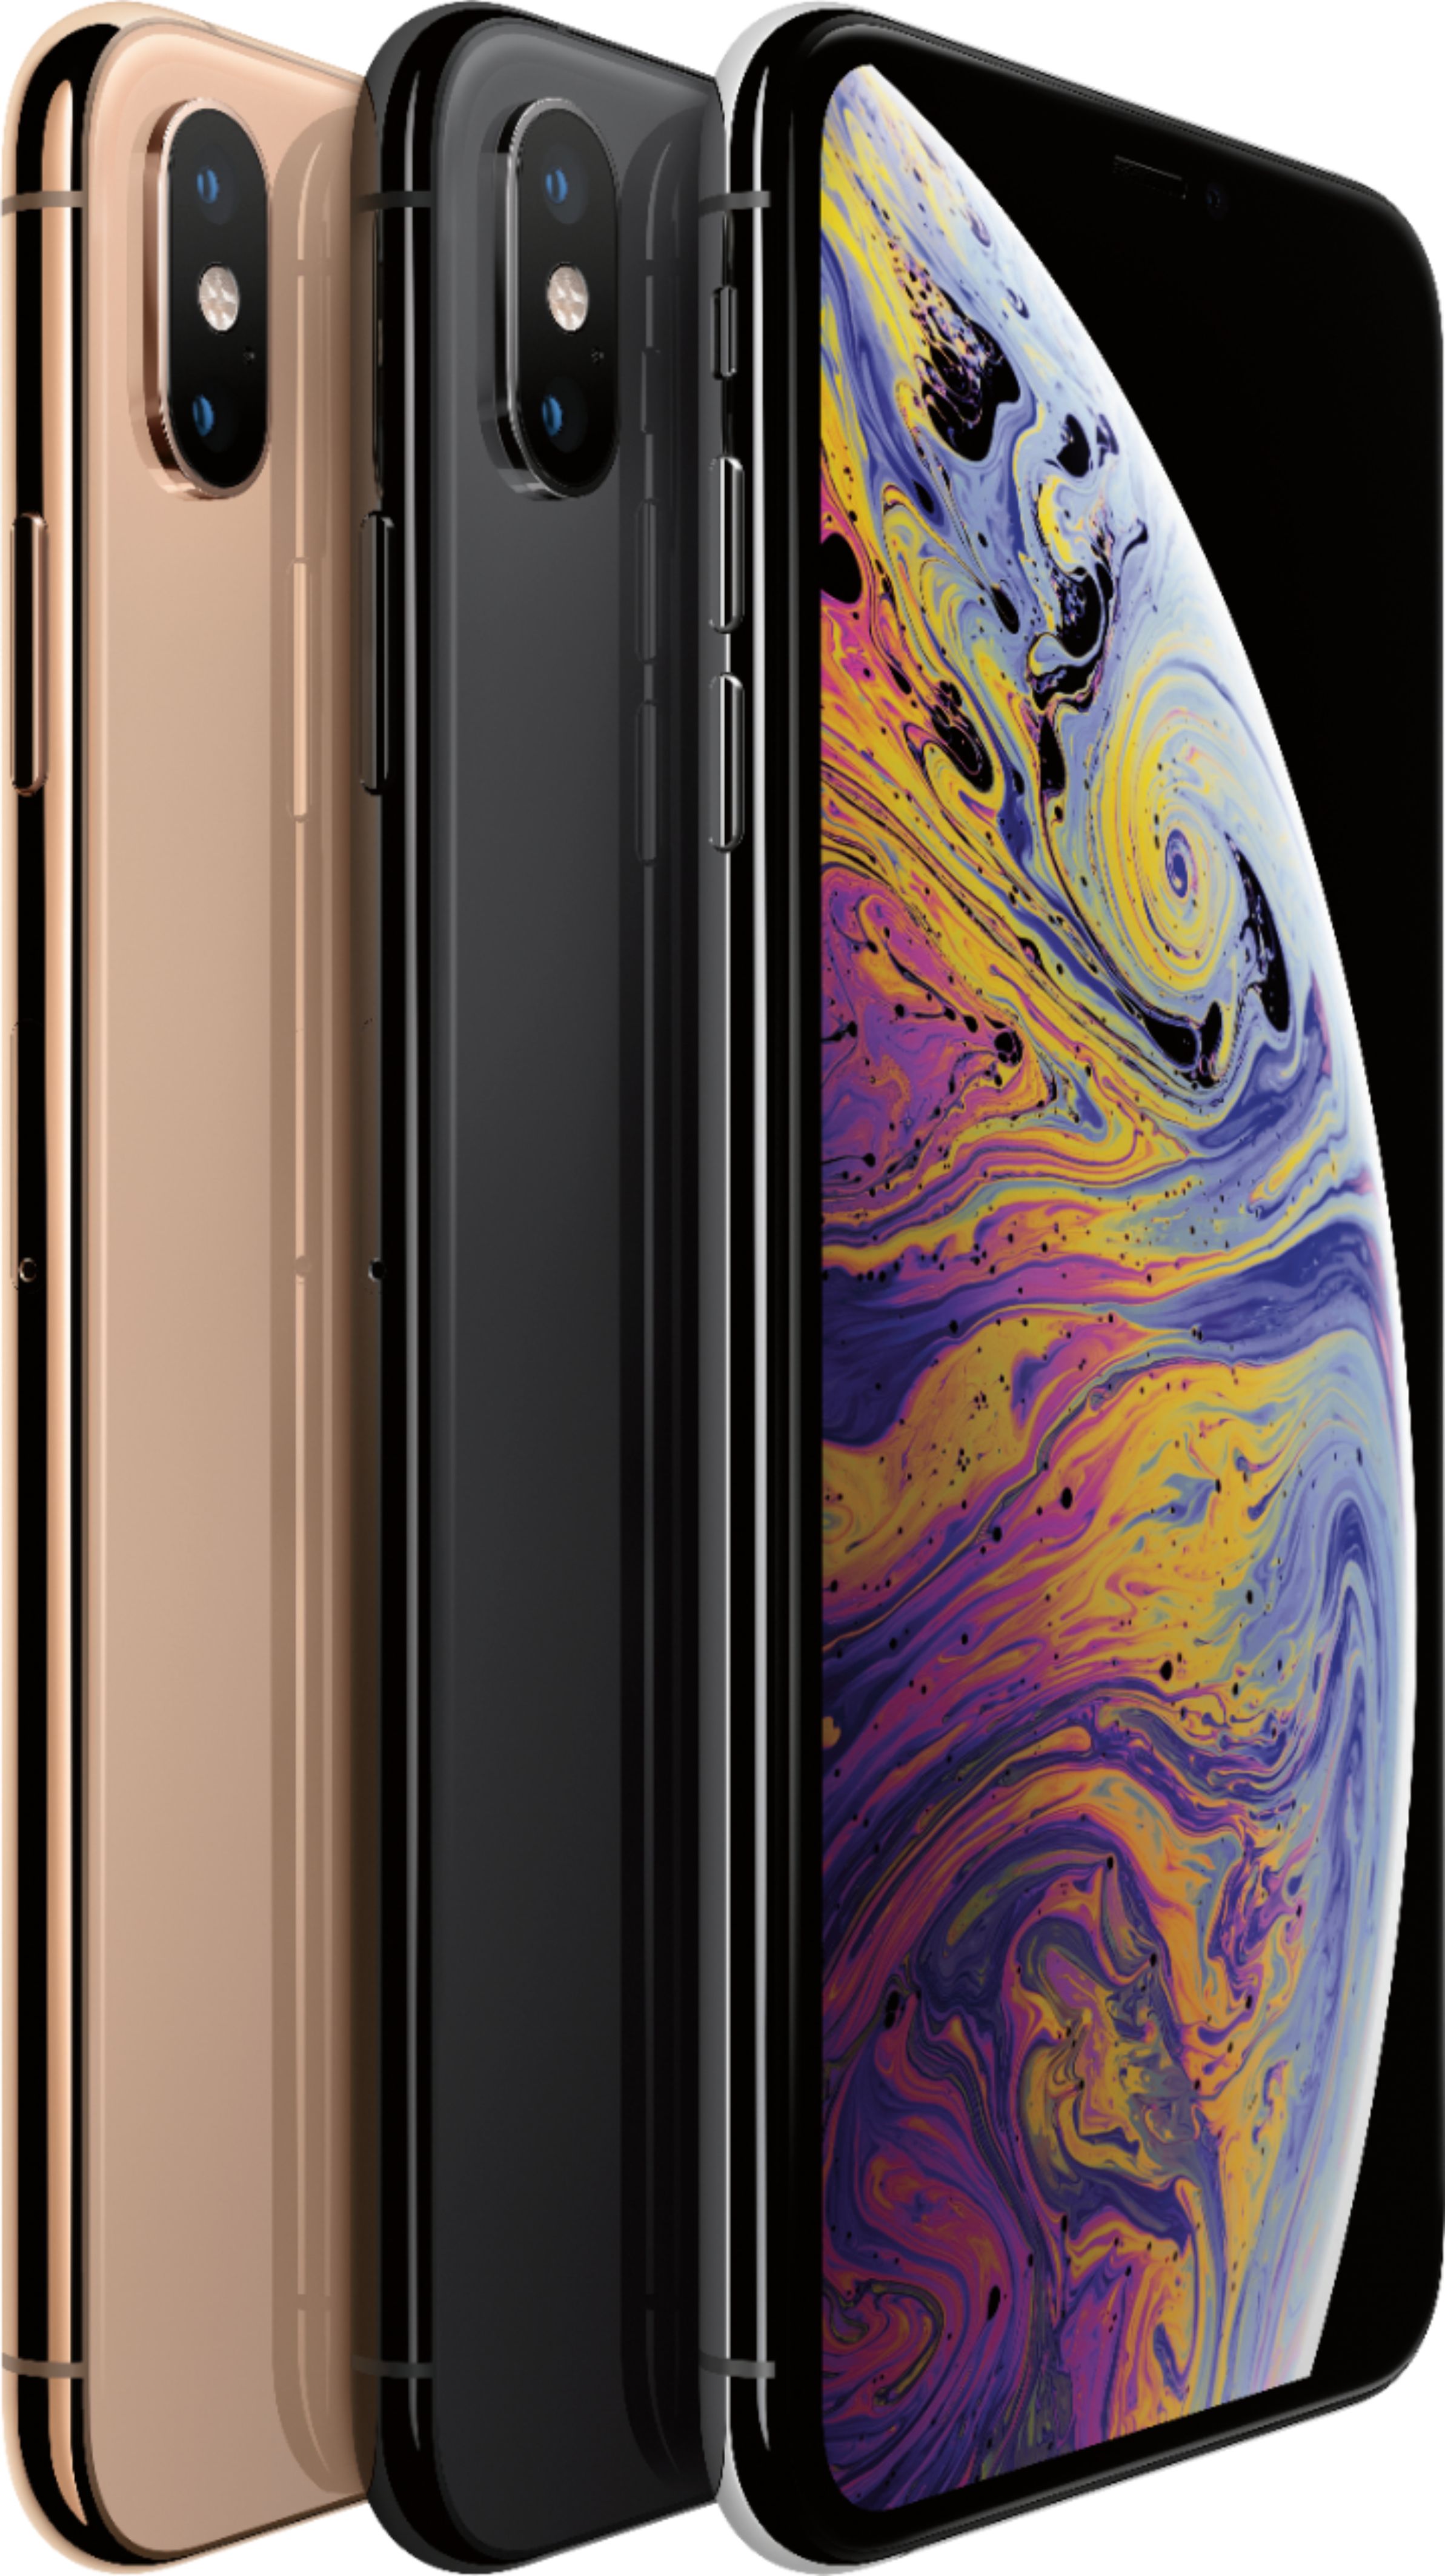 iPhone Xs and iPhone Xs Max bring the best and biggest displays to iPhone -  Apple